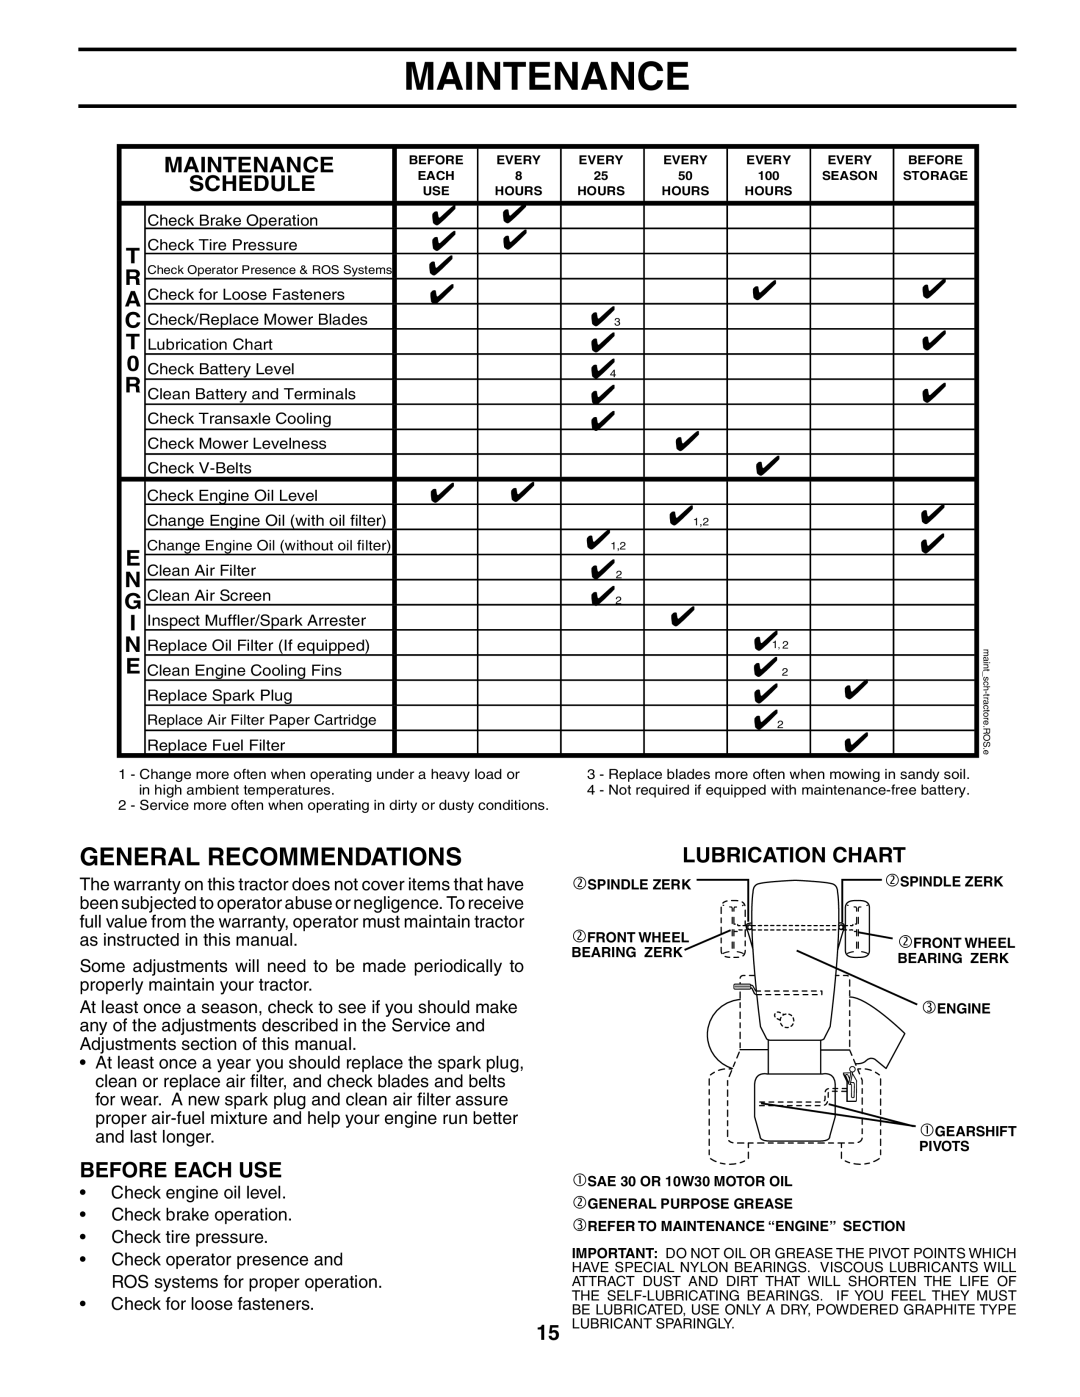 Poulan 401152, 96012004400 manual Maintenance, General Recommendations, Schedule, Before Each Use, Lubrication Chart 